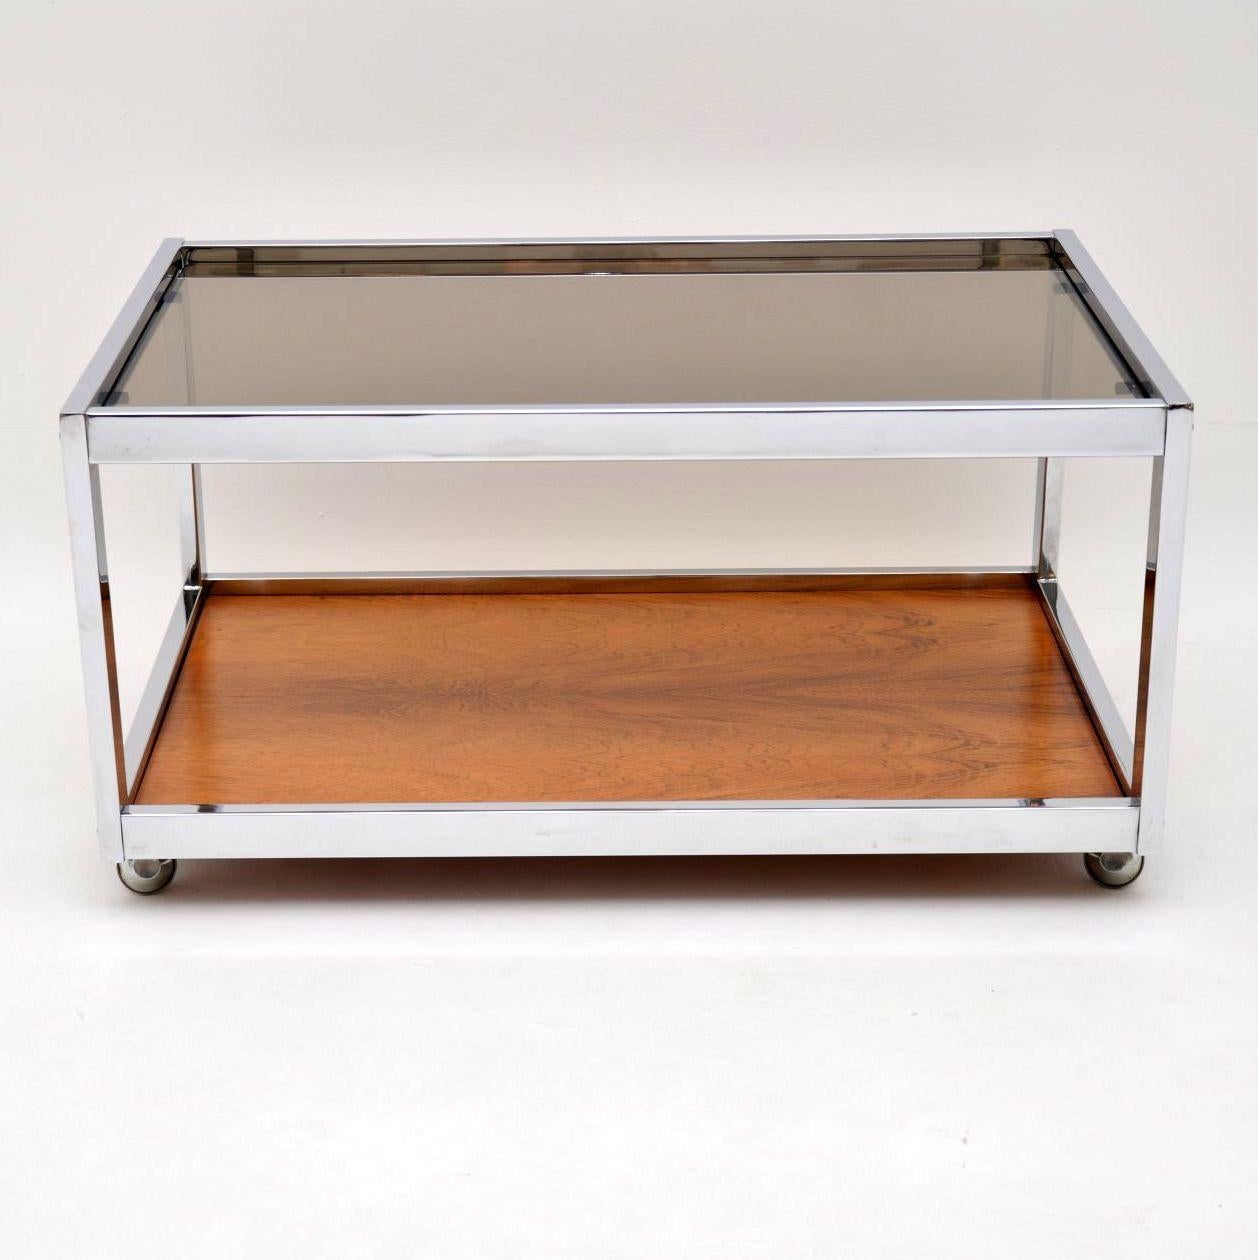 A stylish and very well made vintage coffee table with a chrome frame, wooden base and glass top. This was made by MDA Howard Miller Associates; it dates from the 1970s. This is in excellent condition for its age, it has been extremely well looked